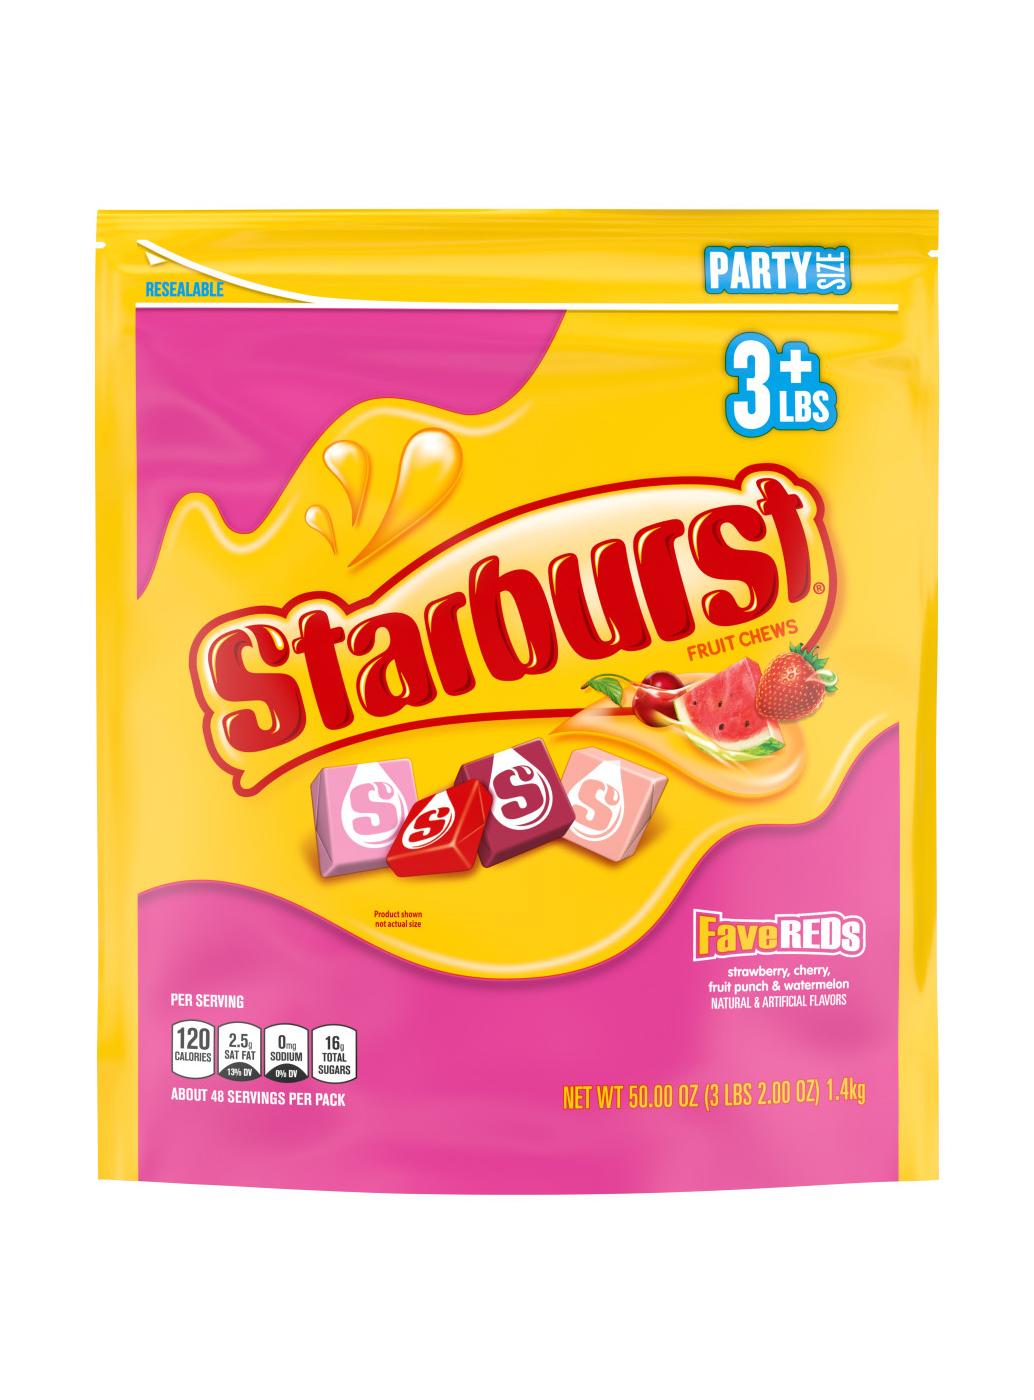 Starburst FaveReds Fruit Chews Candy - Party Size; image 1 of 7